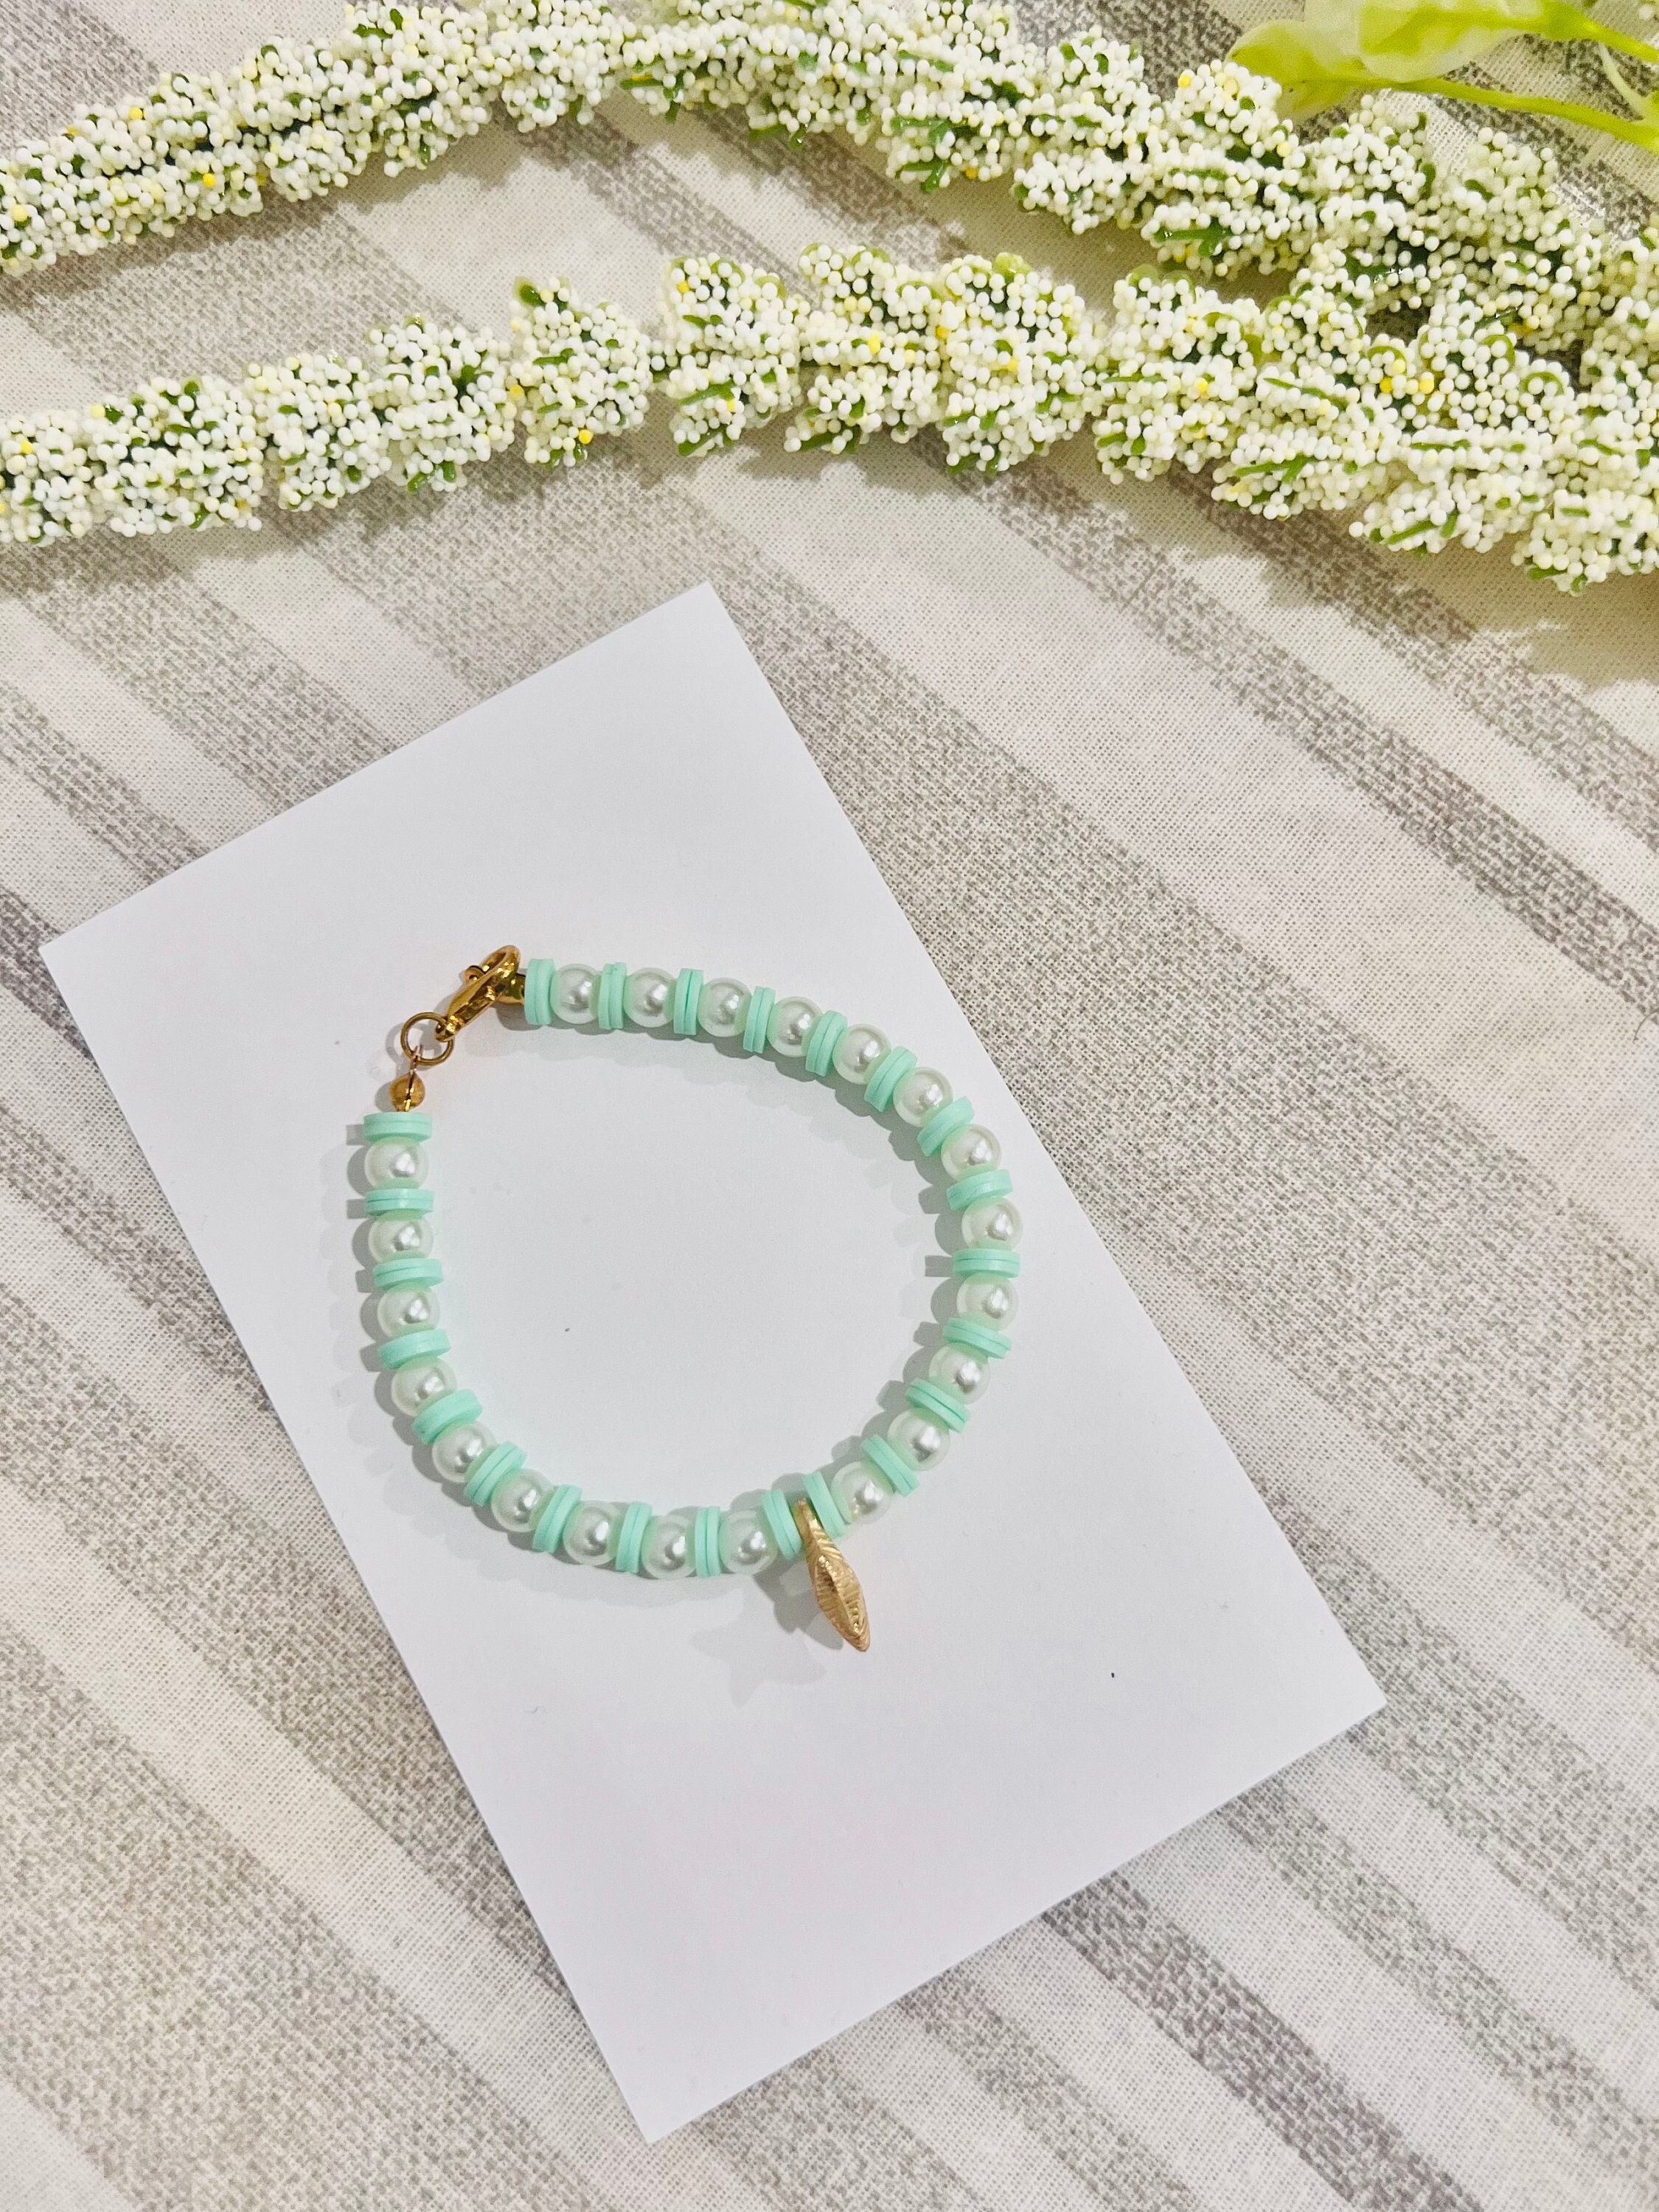 Green Clay Bead Bracelet with Pearls